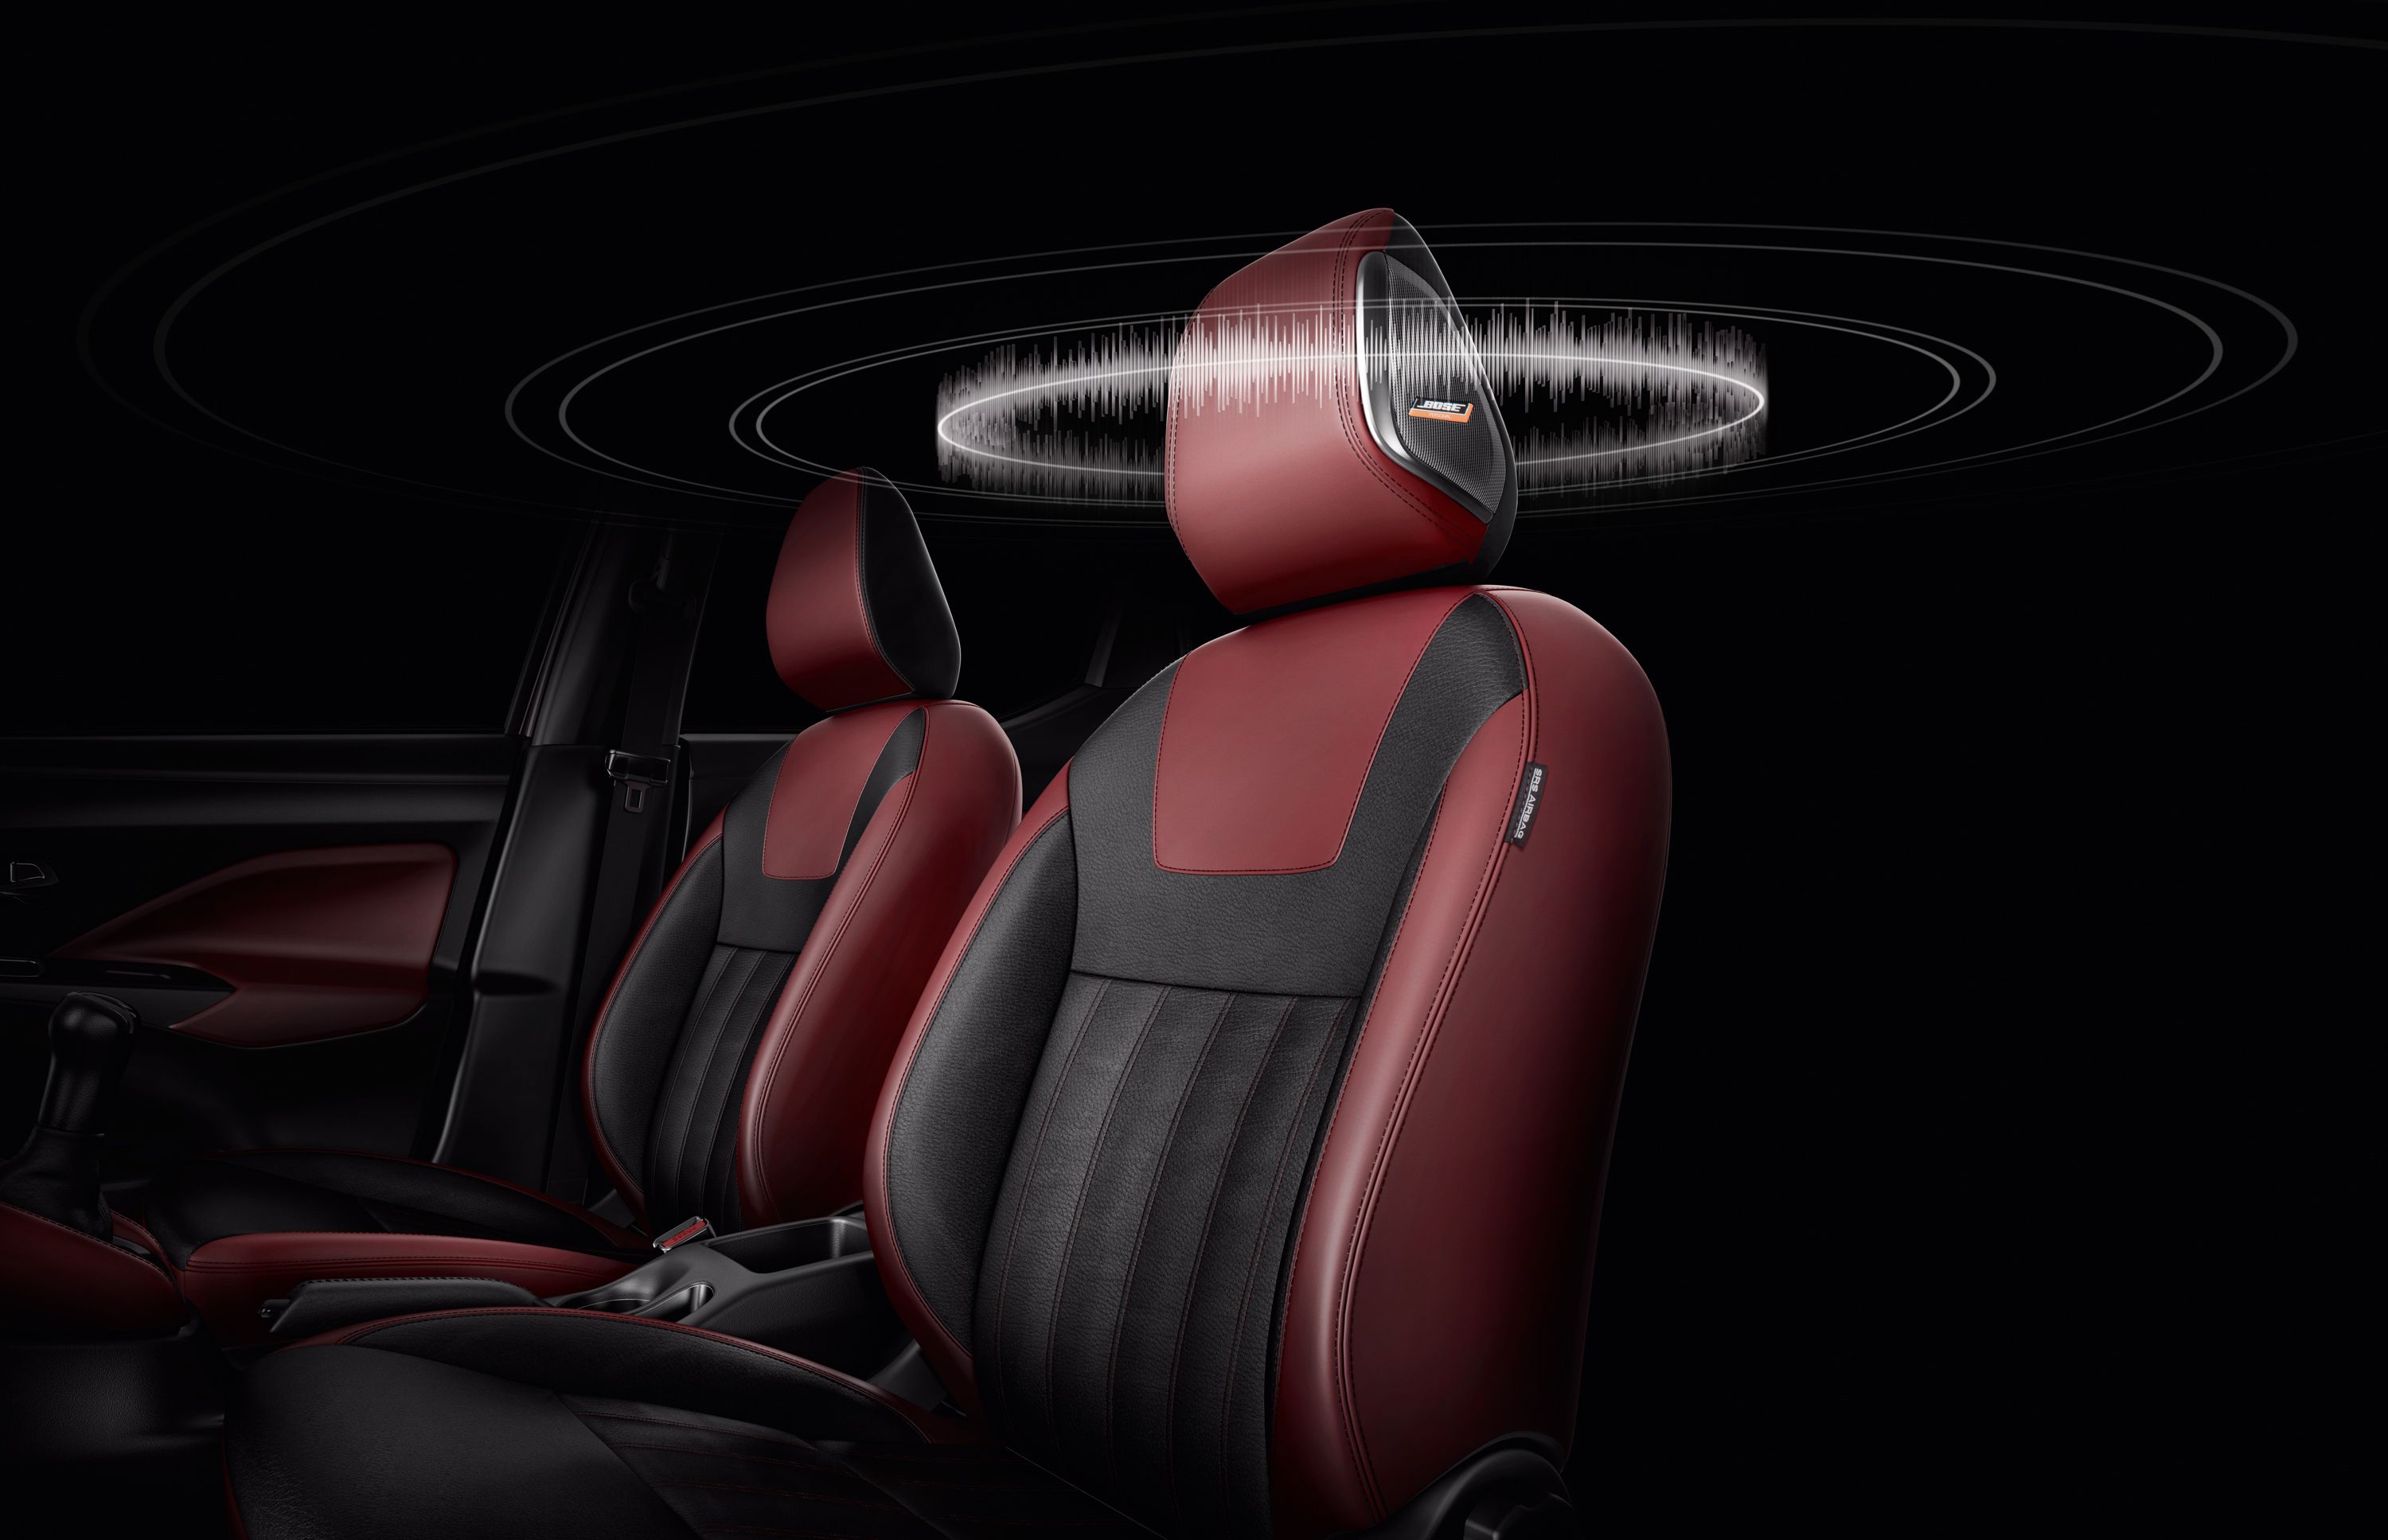 bose s first sound system for small cars will go in the nissan micra image 1